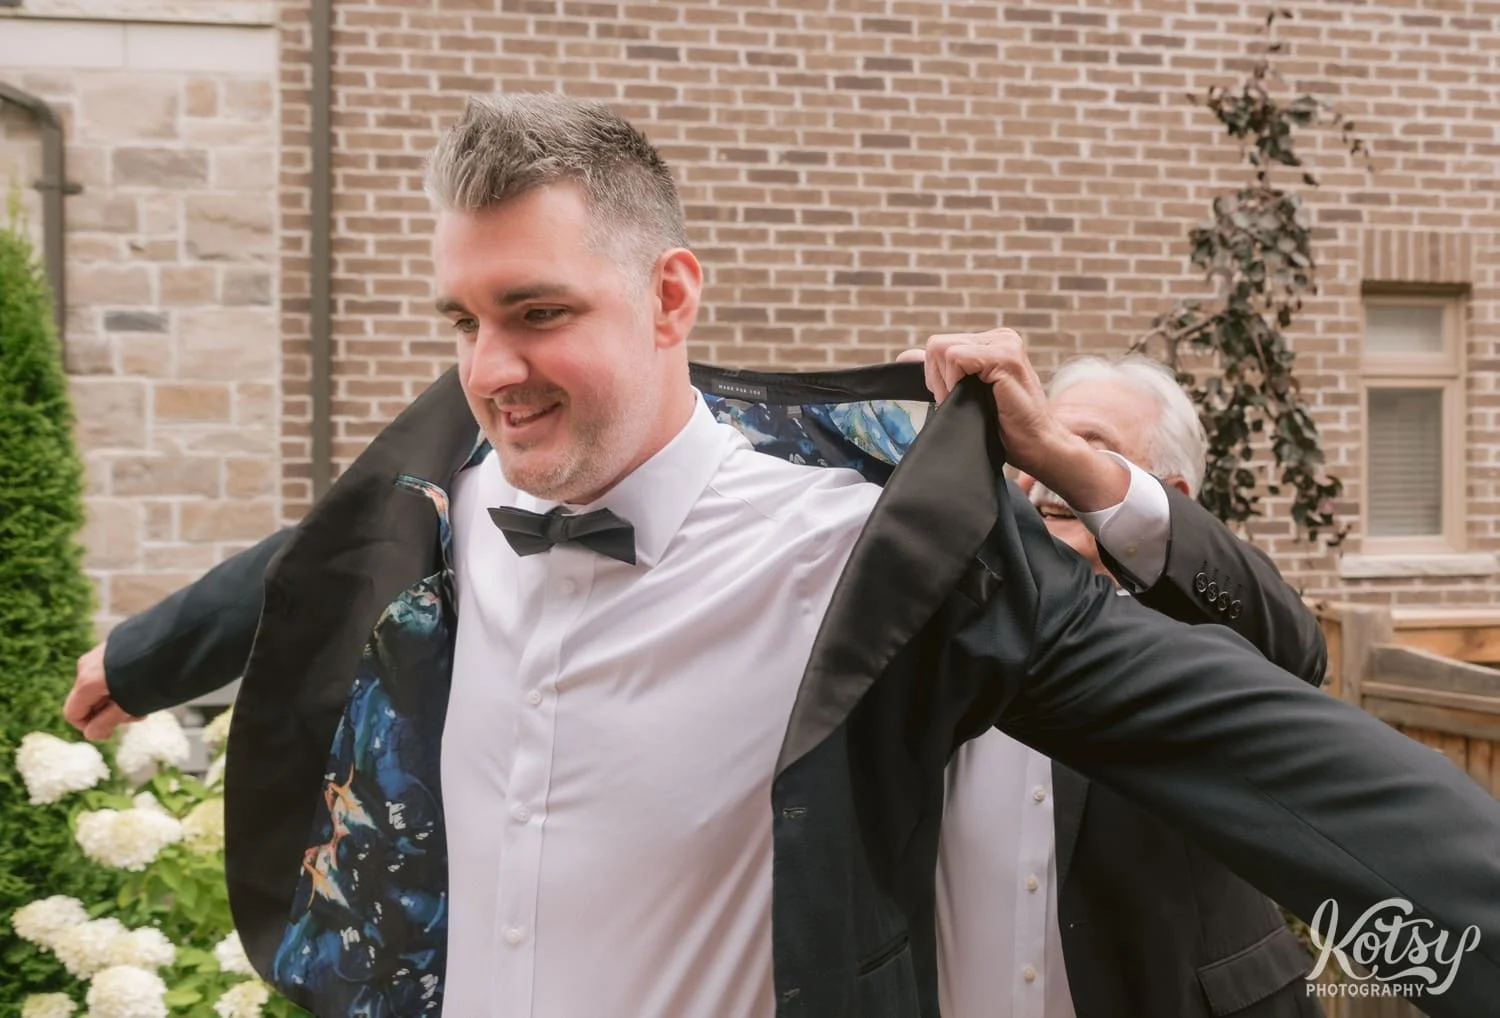 A groom wearing a black bow-tie puts on a black jacket with the help of his father.